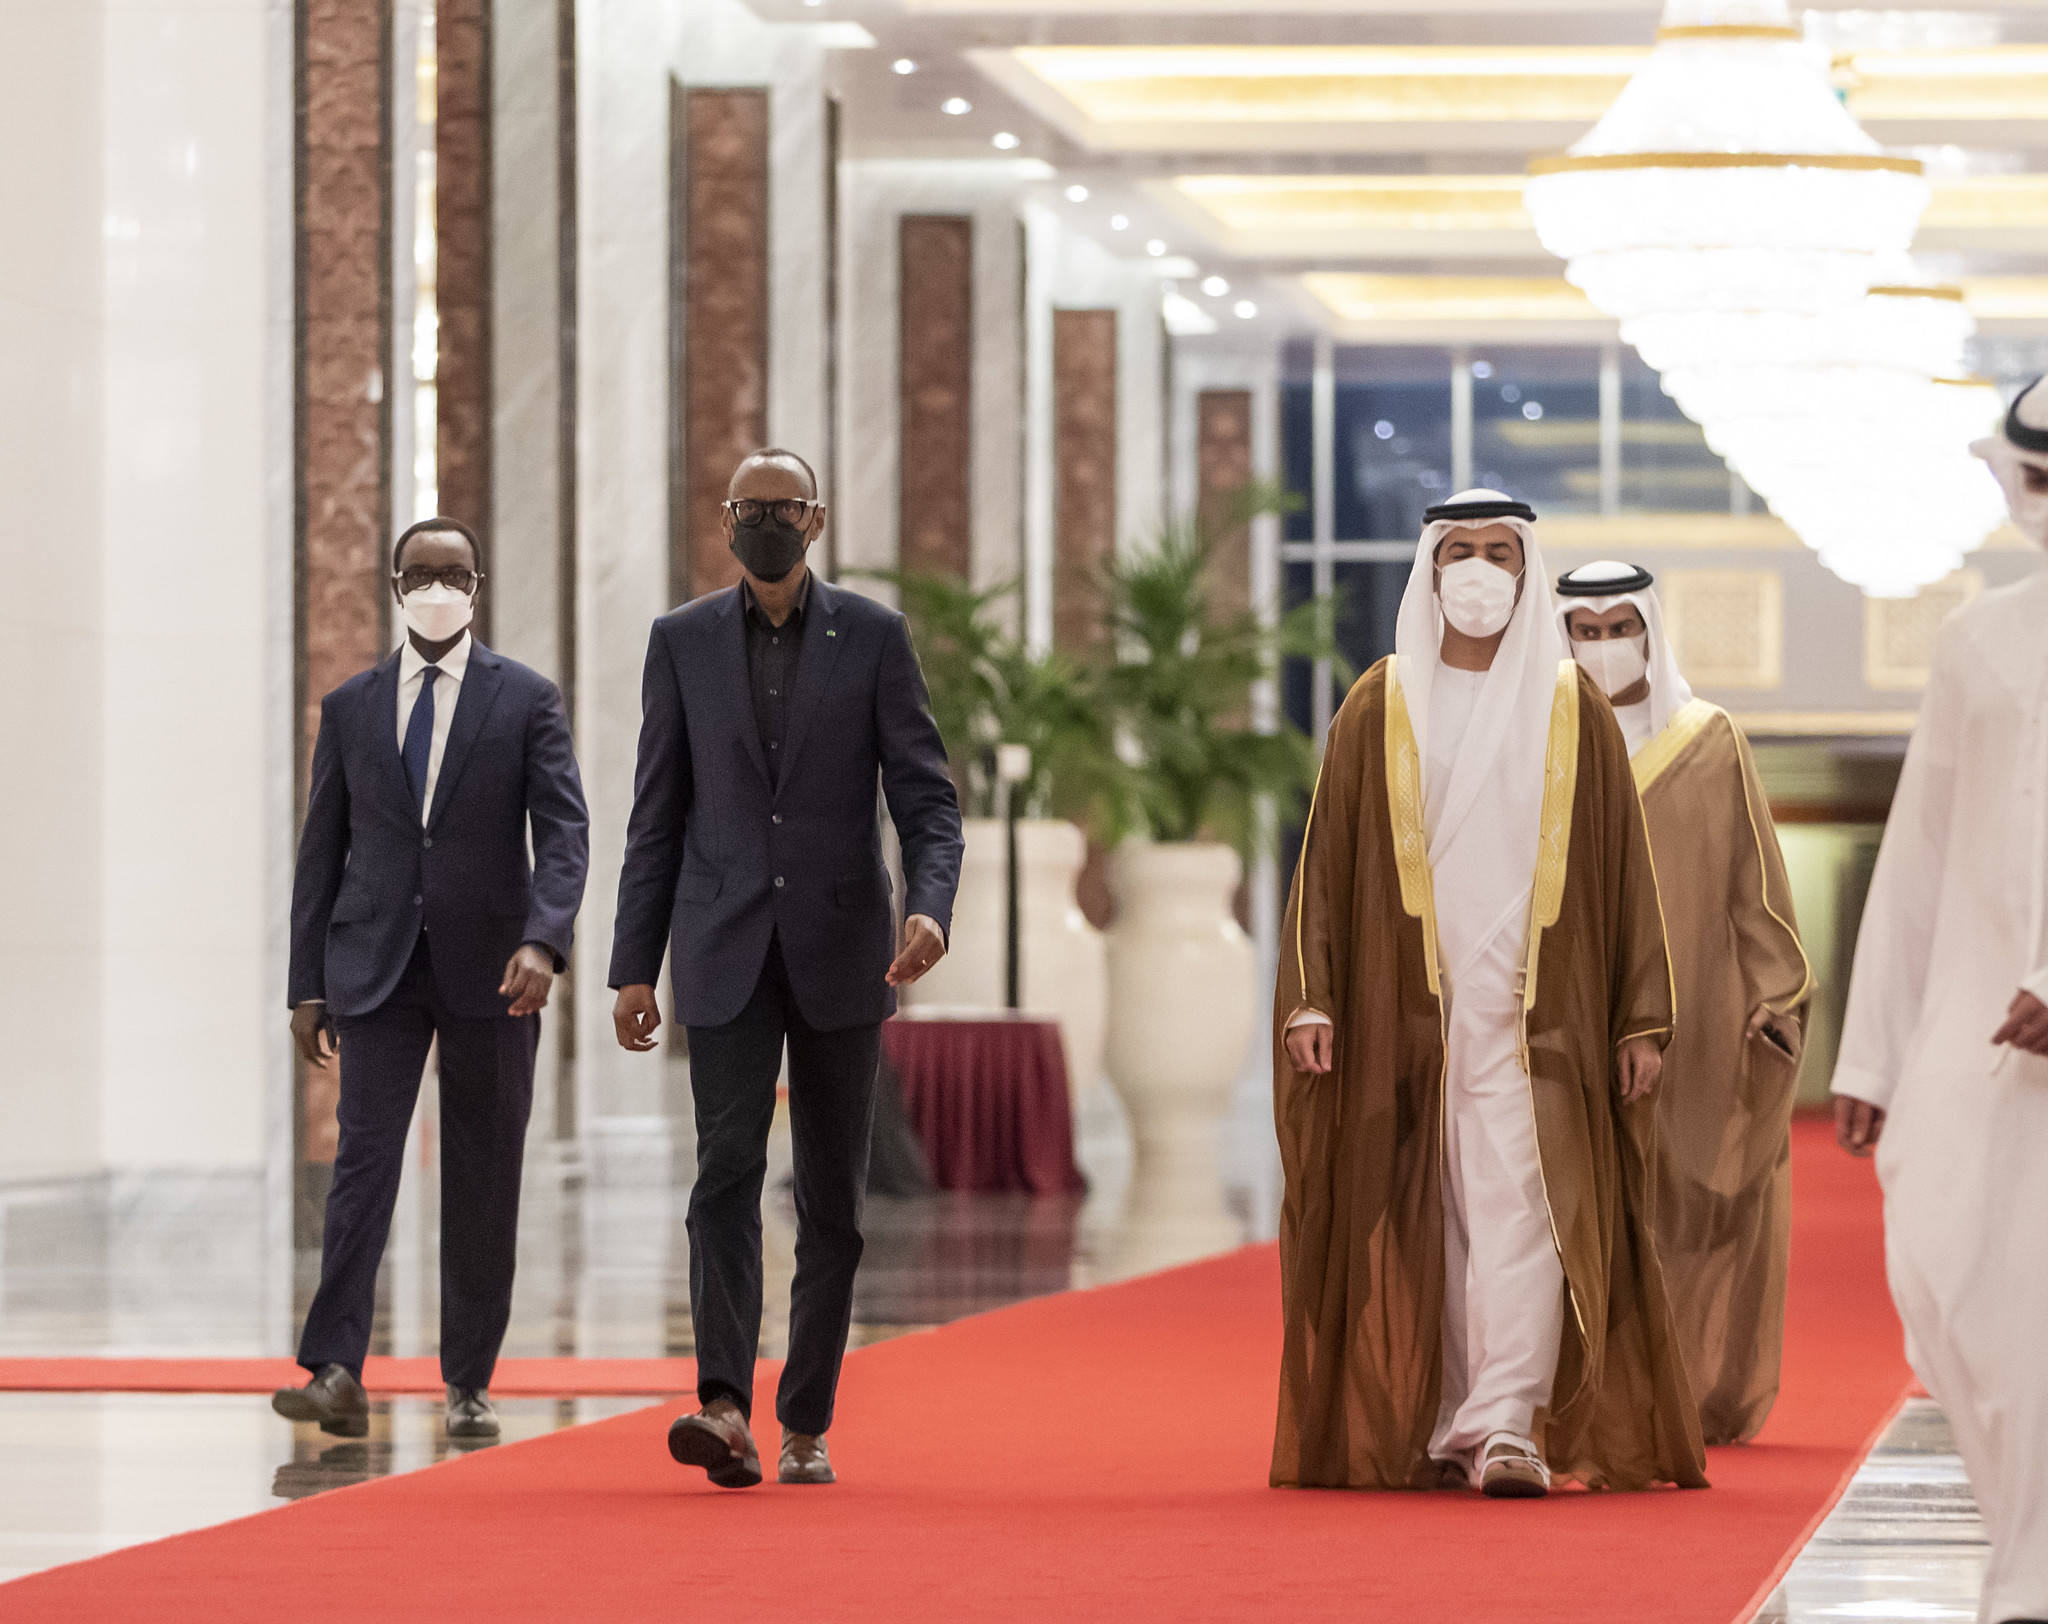 Abu Dhabi: President Kagame to Speak at the 14th Edition of the World Policy Conference